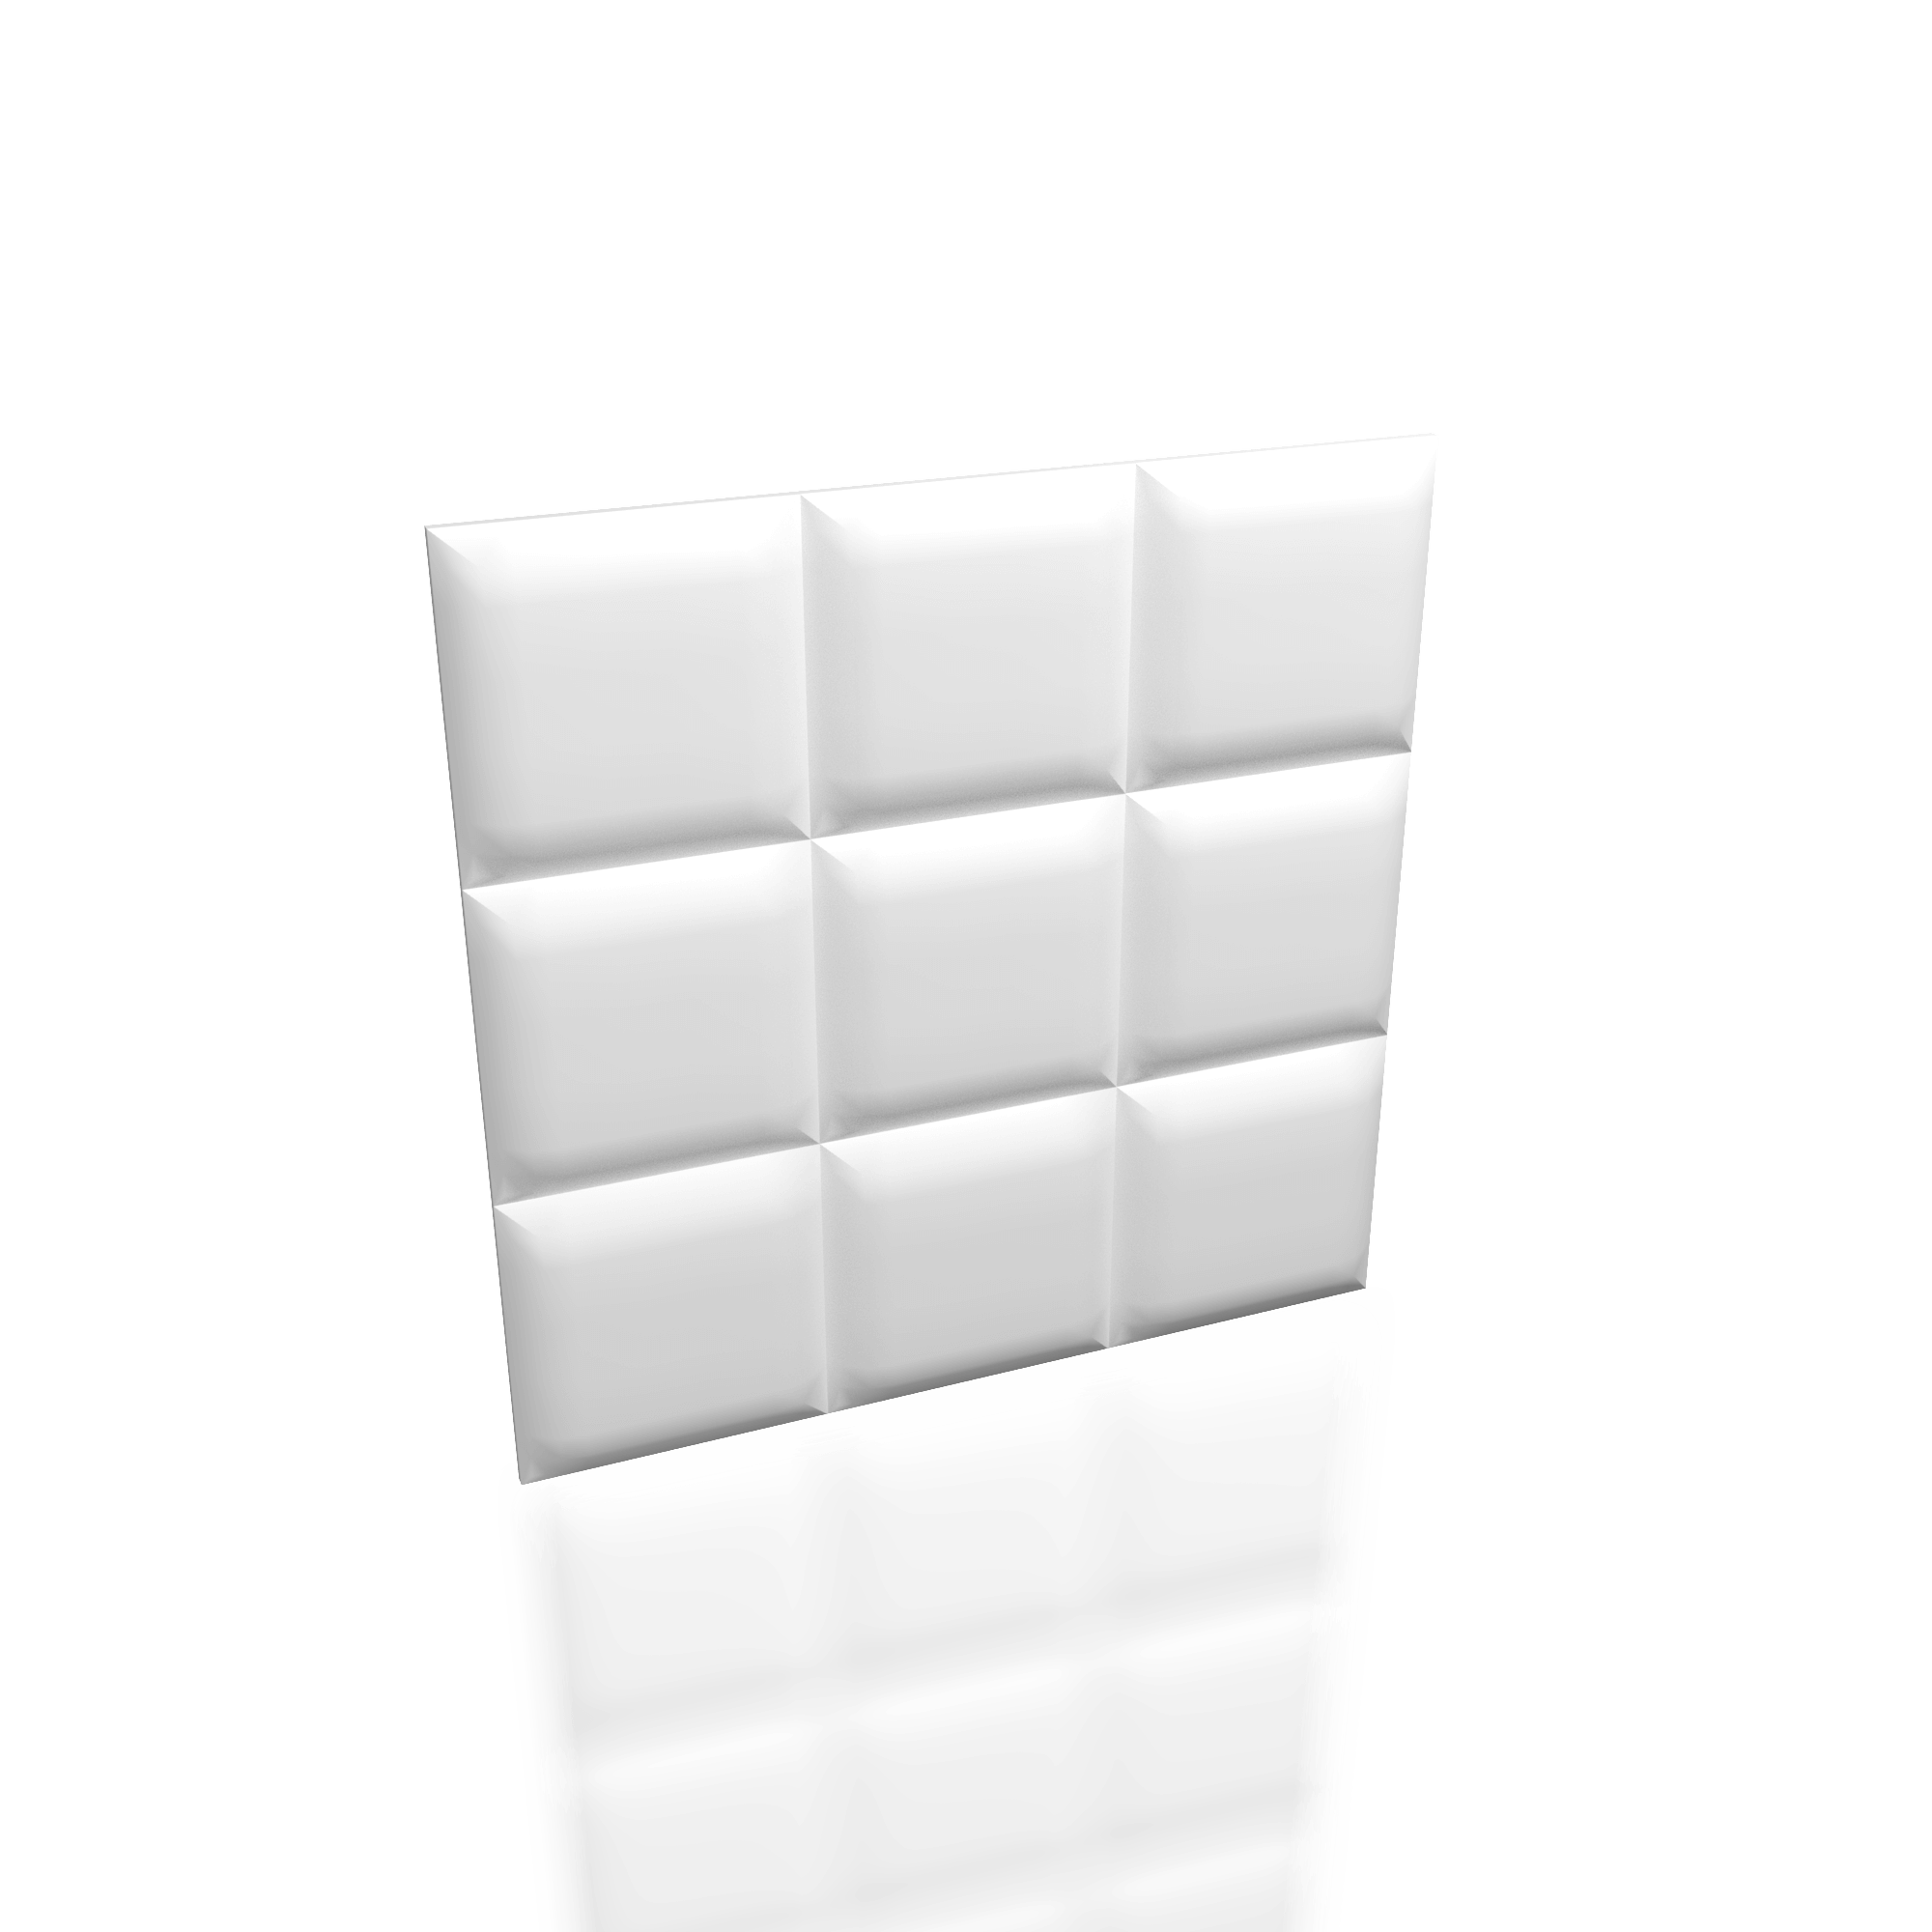 SQUARE 3D Wall Panel EPS - 3D Polystyrene Wall Panels | DecorMania